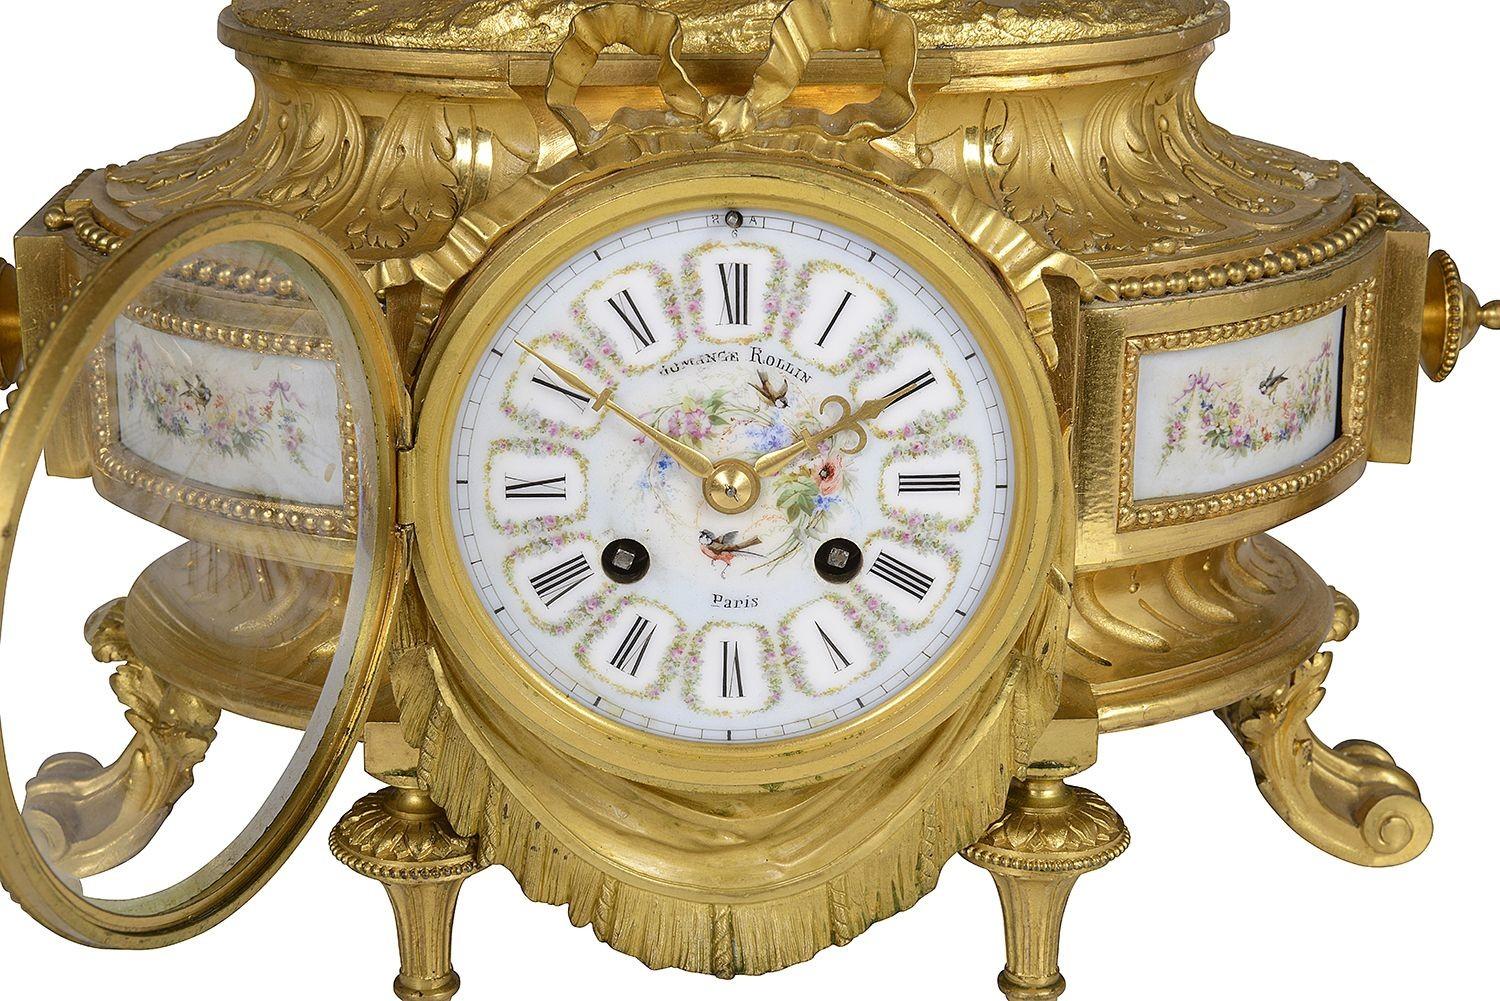 A fine quality 19th Century French gilded ormolu and hand painted porcelain clock garniture, having a statue of a mother and child playing musical instruments above a eight day duration clock that strikes on the hour and half hour, matching